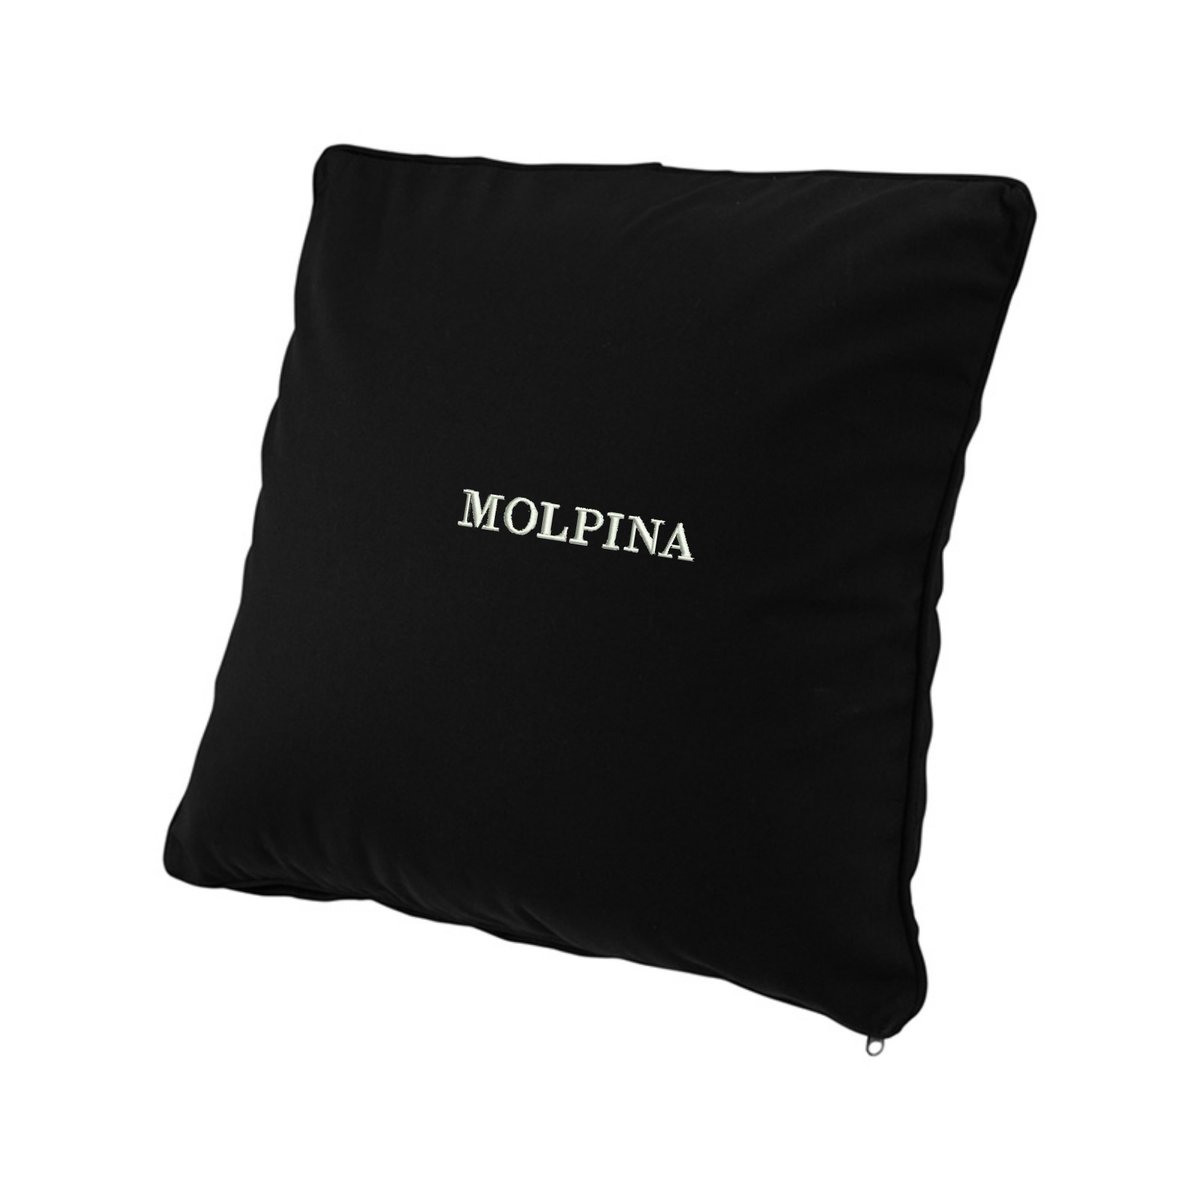 #black #embroidery #cushioncover
molpina.stores.jp